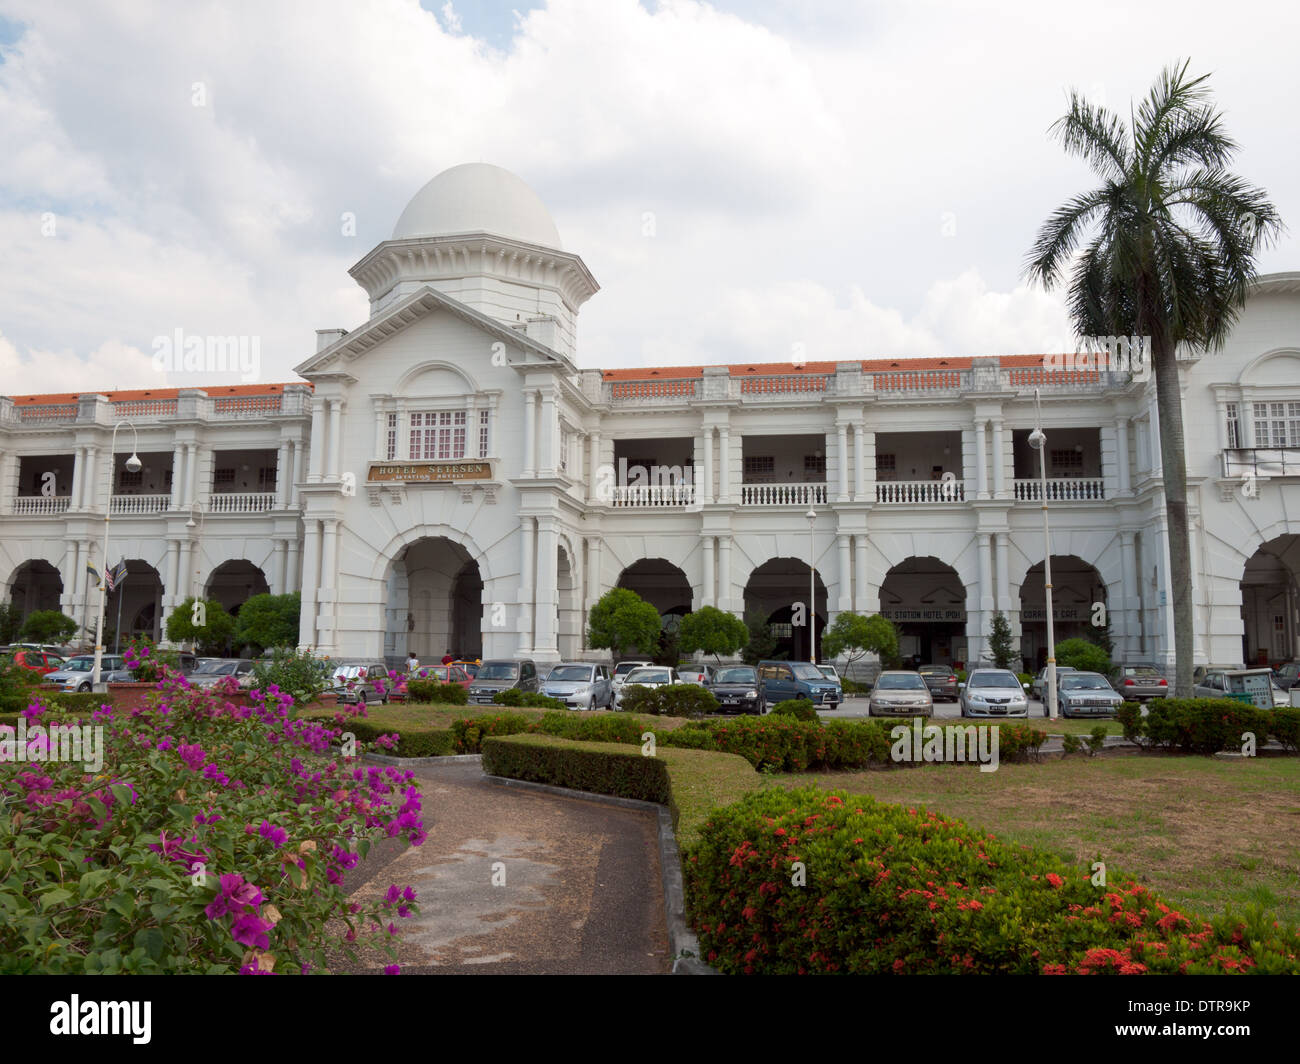 The Ipoh Railway Station in Ipoh, Malaysia. Stock Photo